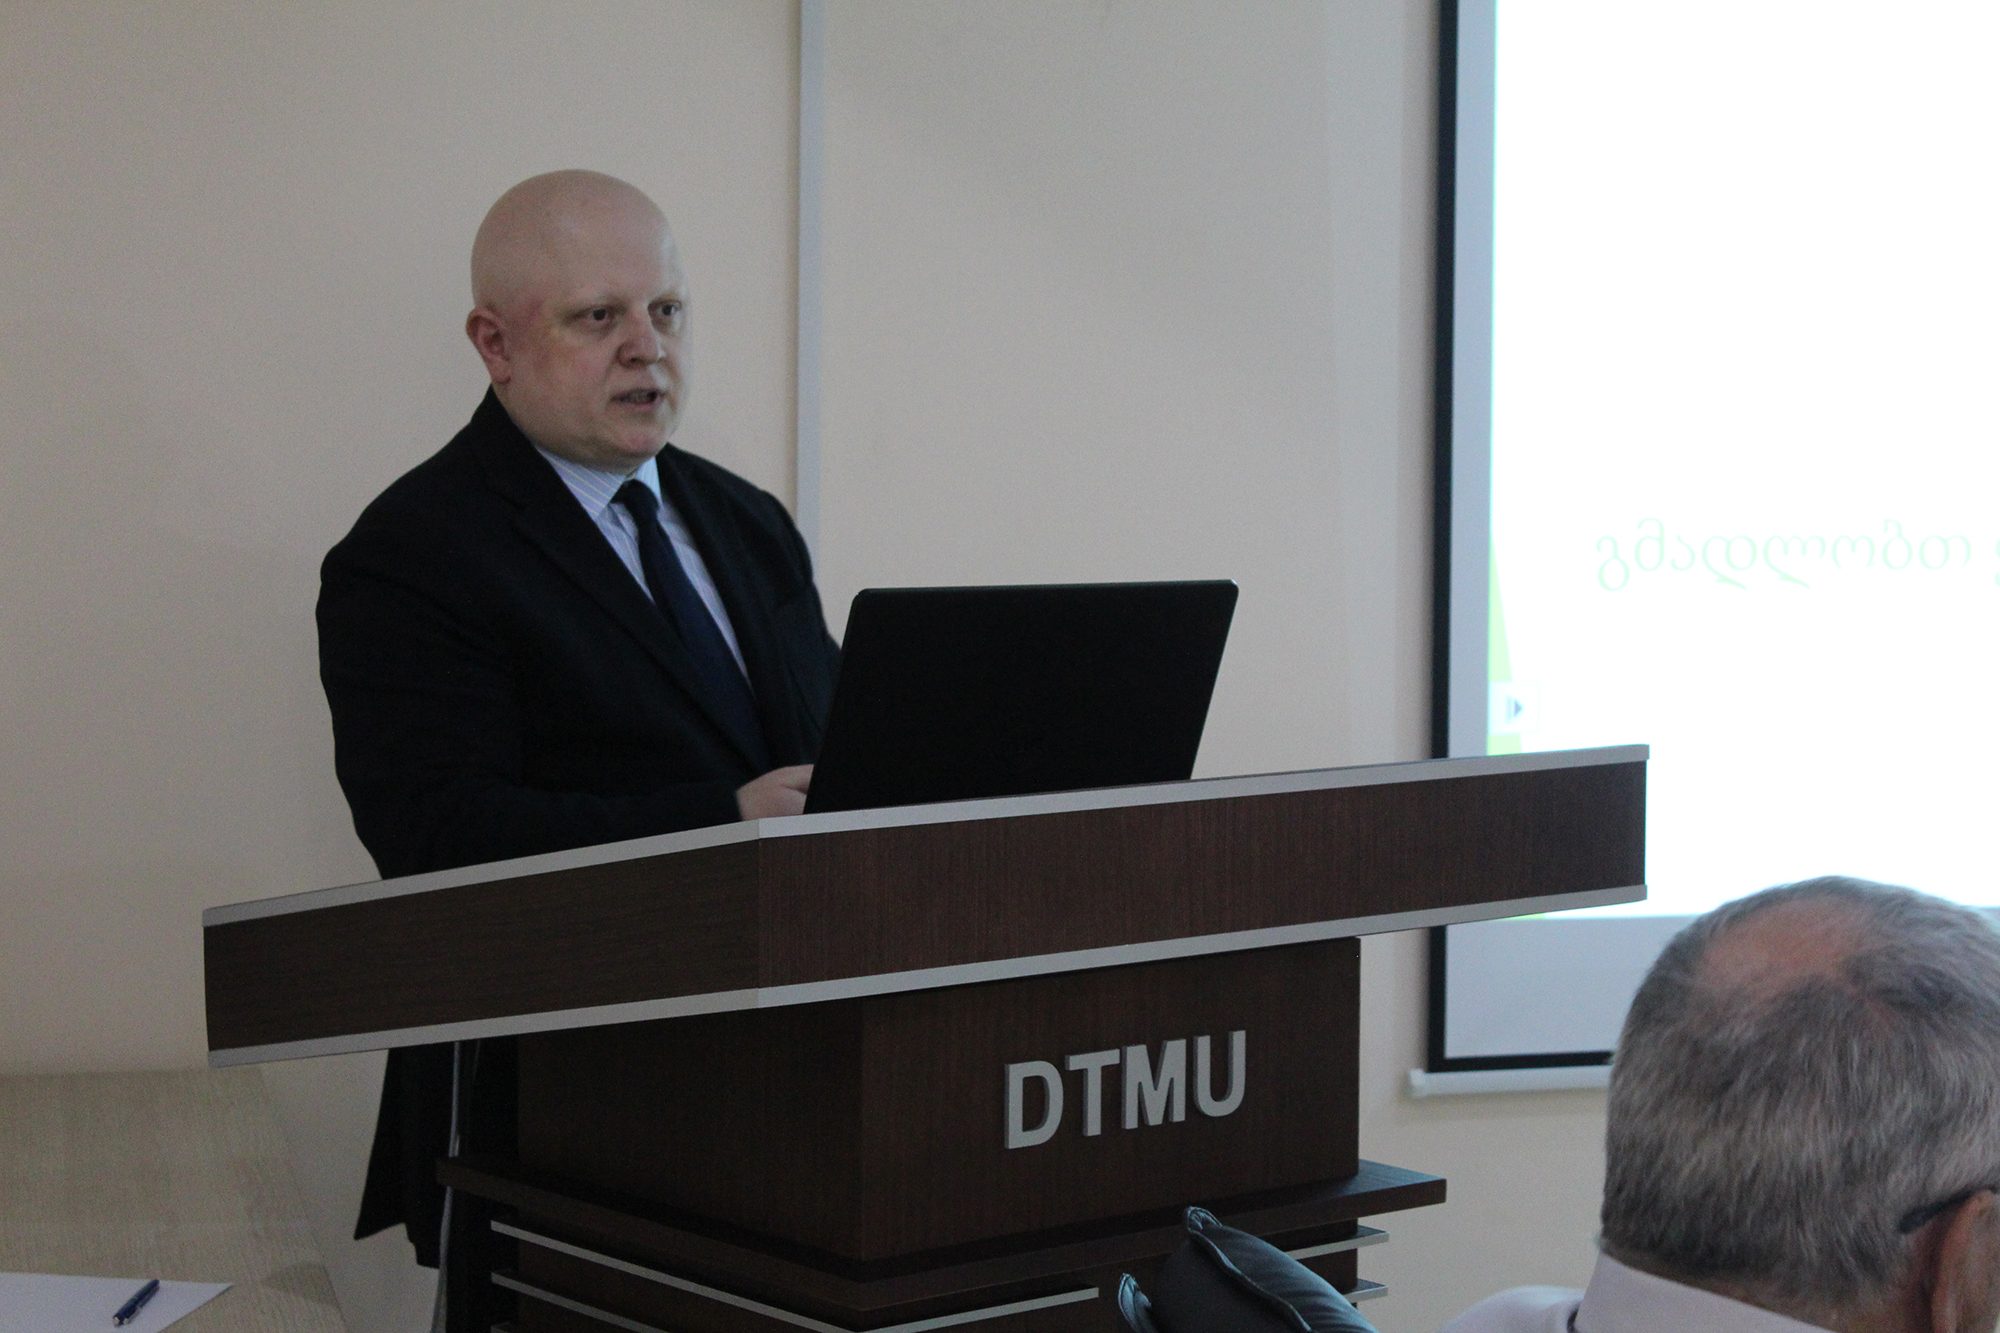 The dissertation defense of PhD candidate Giorgi Papiashvili with title ,,Association of Paroxysmal Supraventricular Tachycardia with Personality Type, Anxiety and Quality of Life and Influence of Catheter Ablation on Anxiety and Quality of Life“